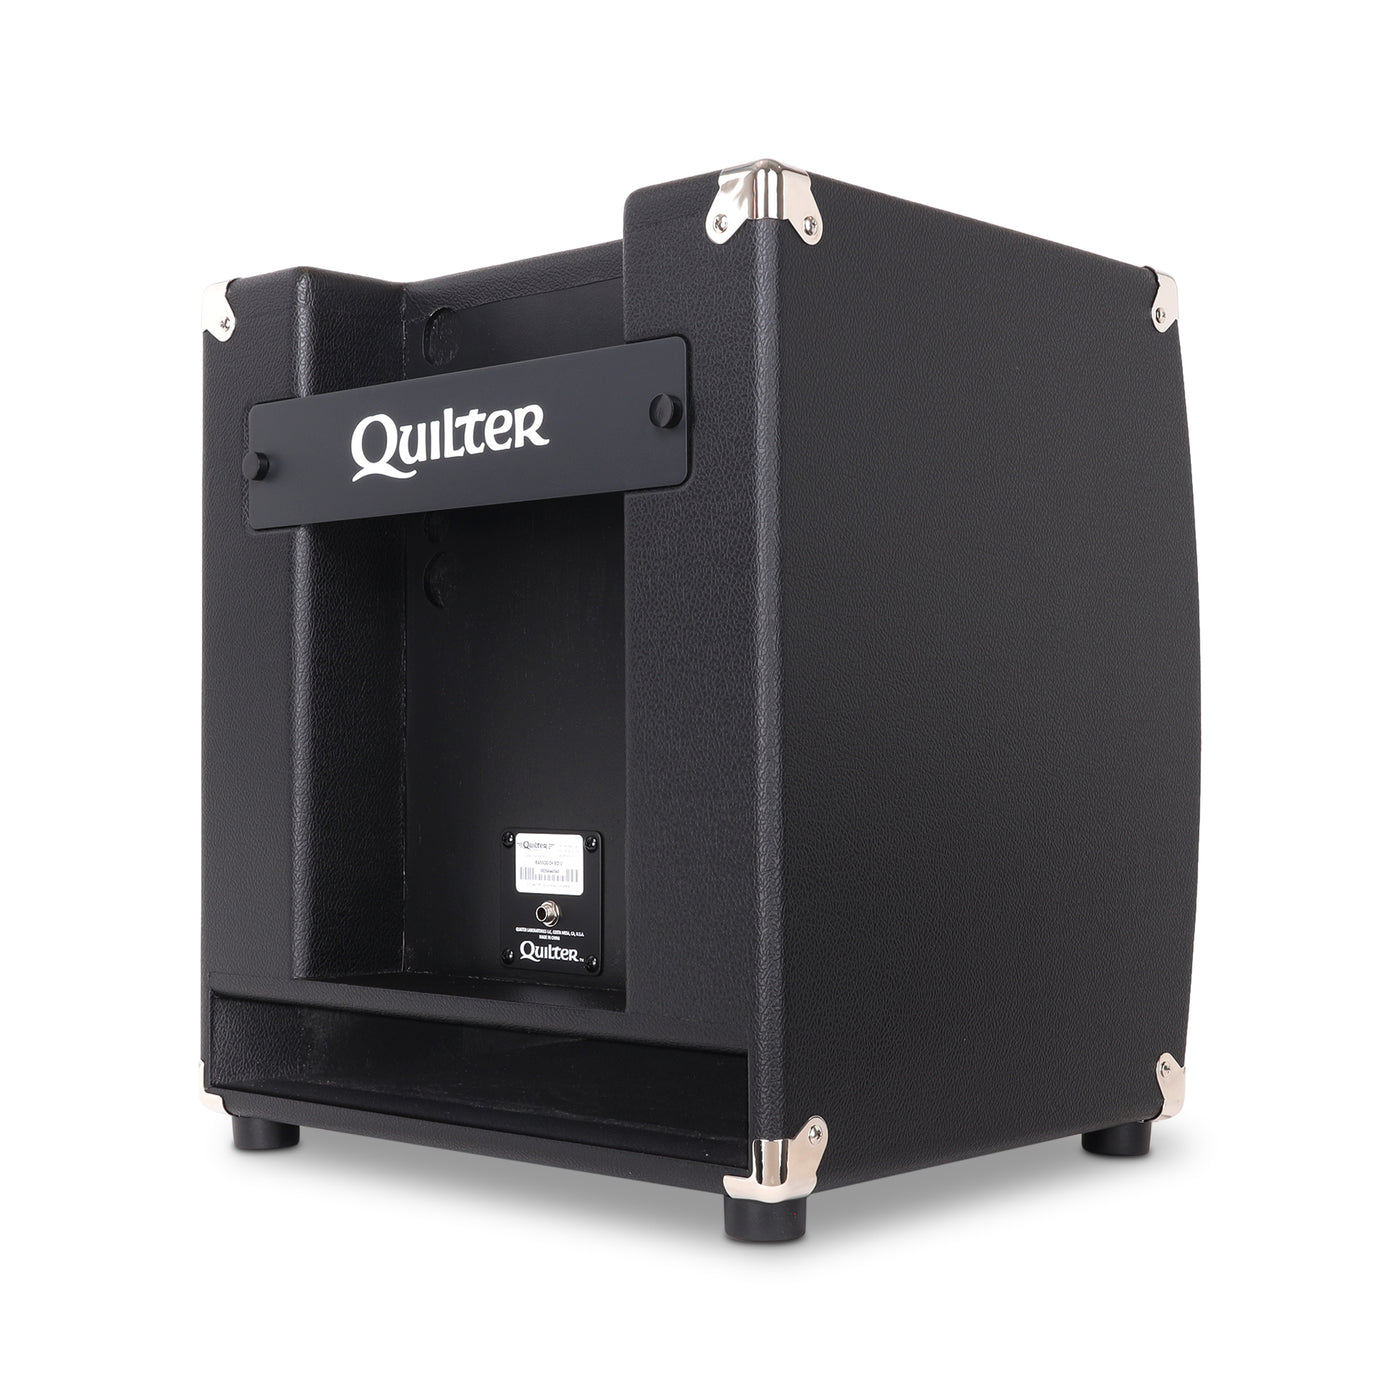 Quilter Labs BassDock 12 amplifier cabinet - facing away diagonally to the right